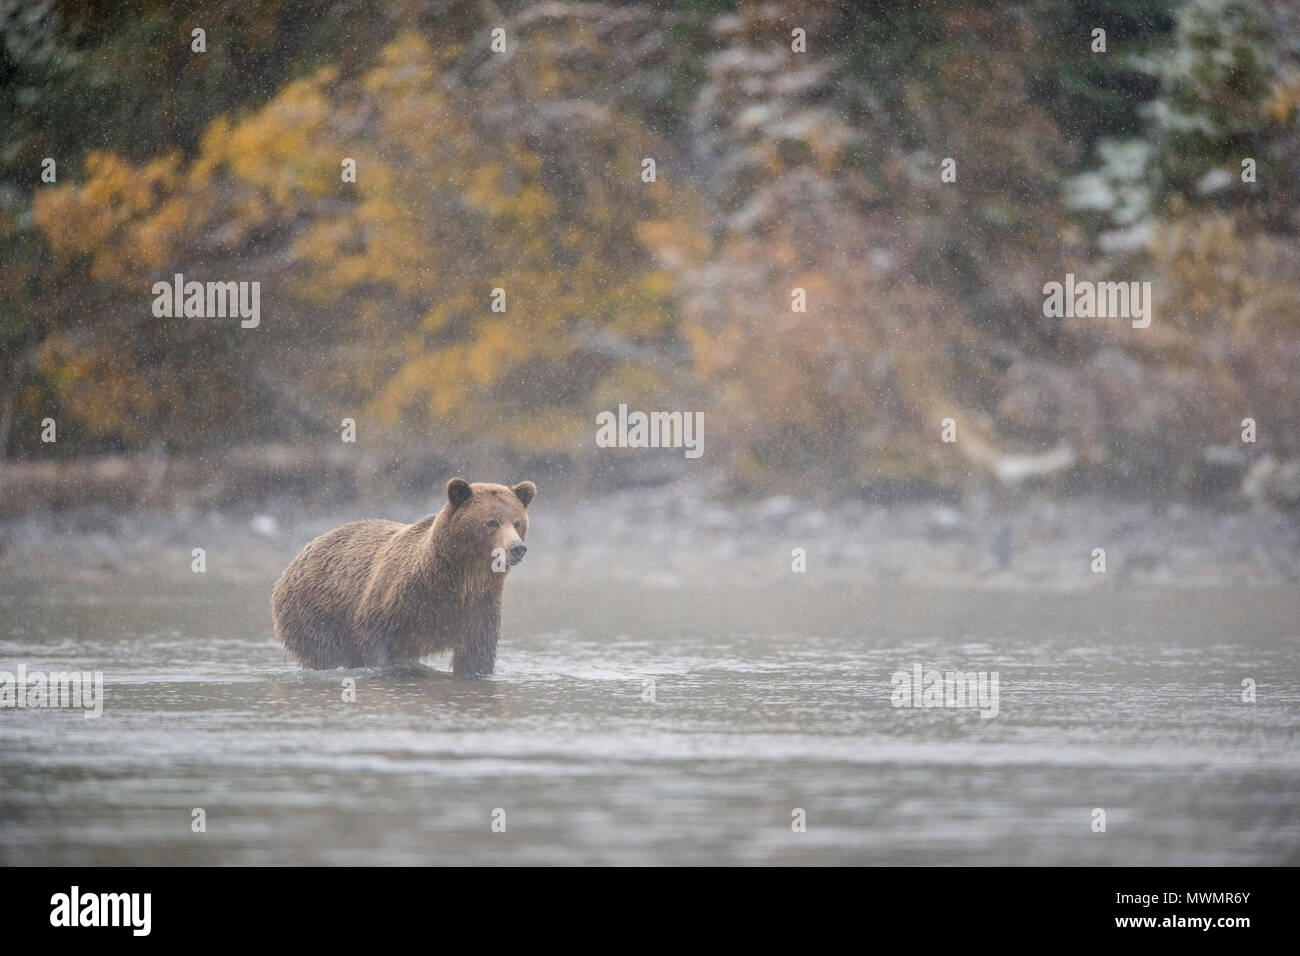 Grizzly bear (Ursus arctos)- Hunting for sockeye salmon spawning in the Chilko River, Chilcotin Wilderness, British Columbia BC, Canada Stock Photo